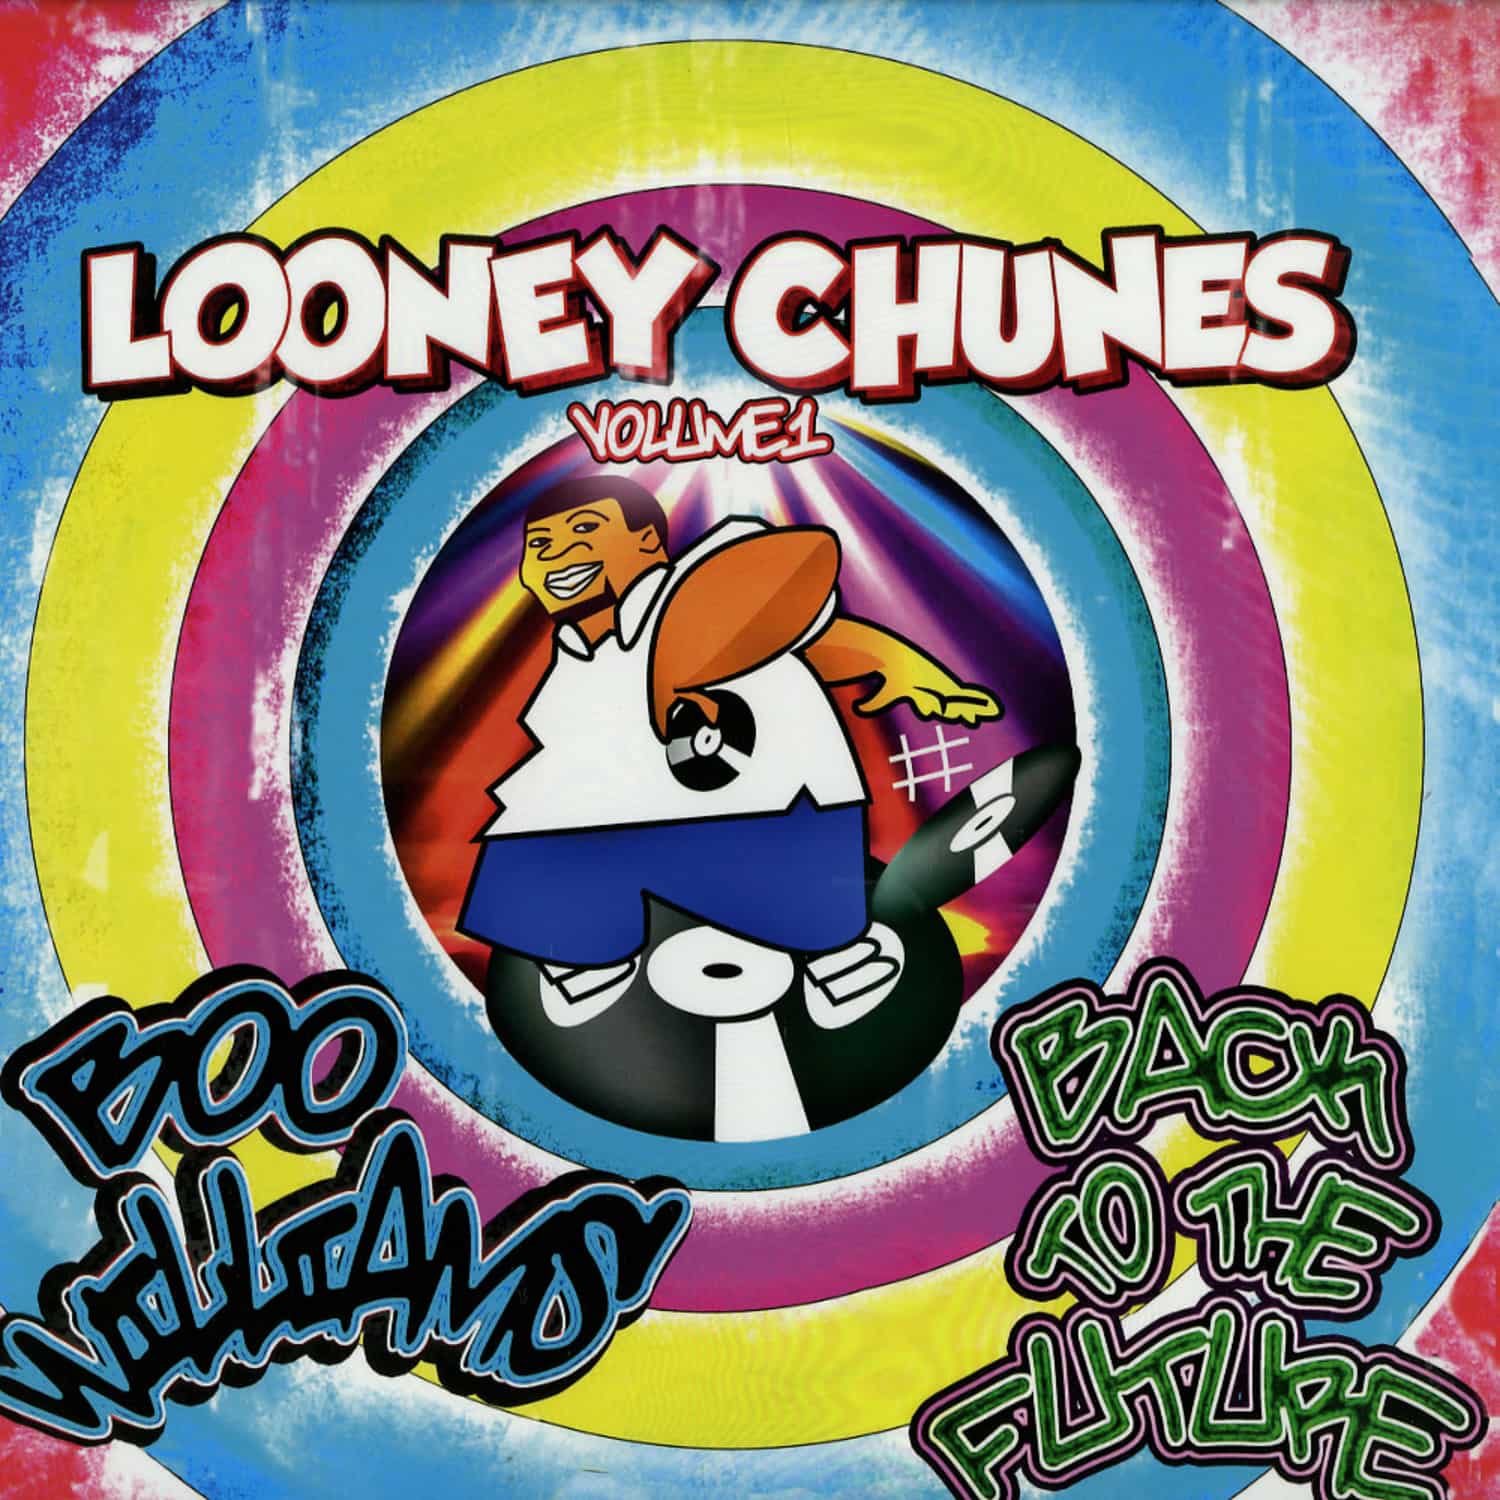 Boo Williams - BACK TO THE FUTURE / LOONEY CHUNES VOL.1 